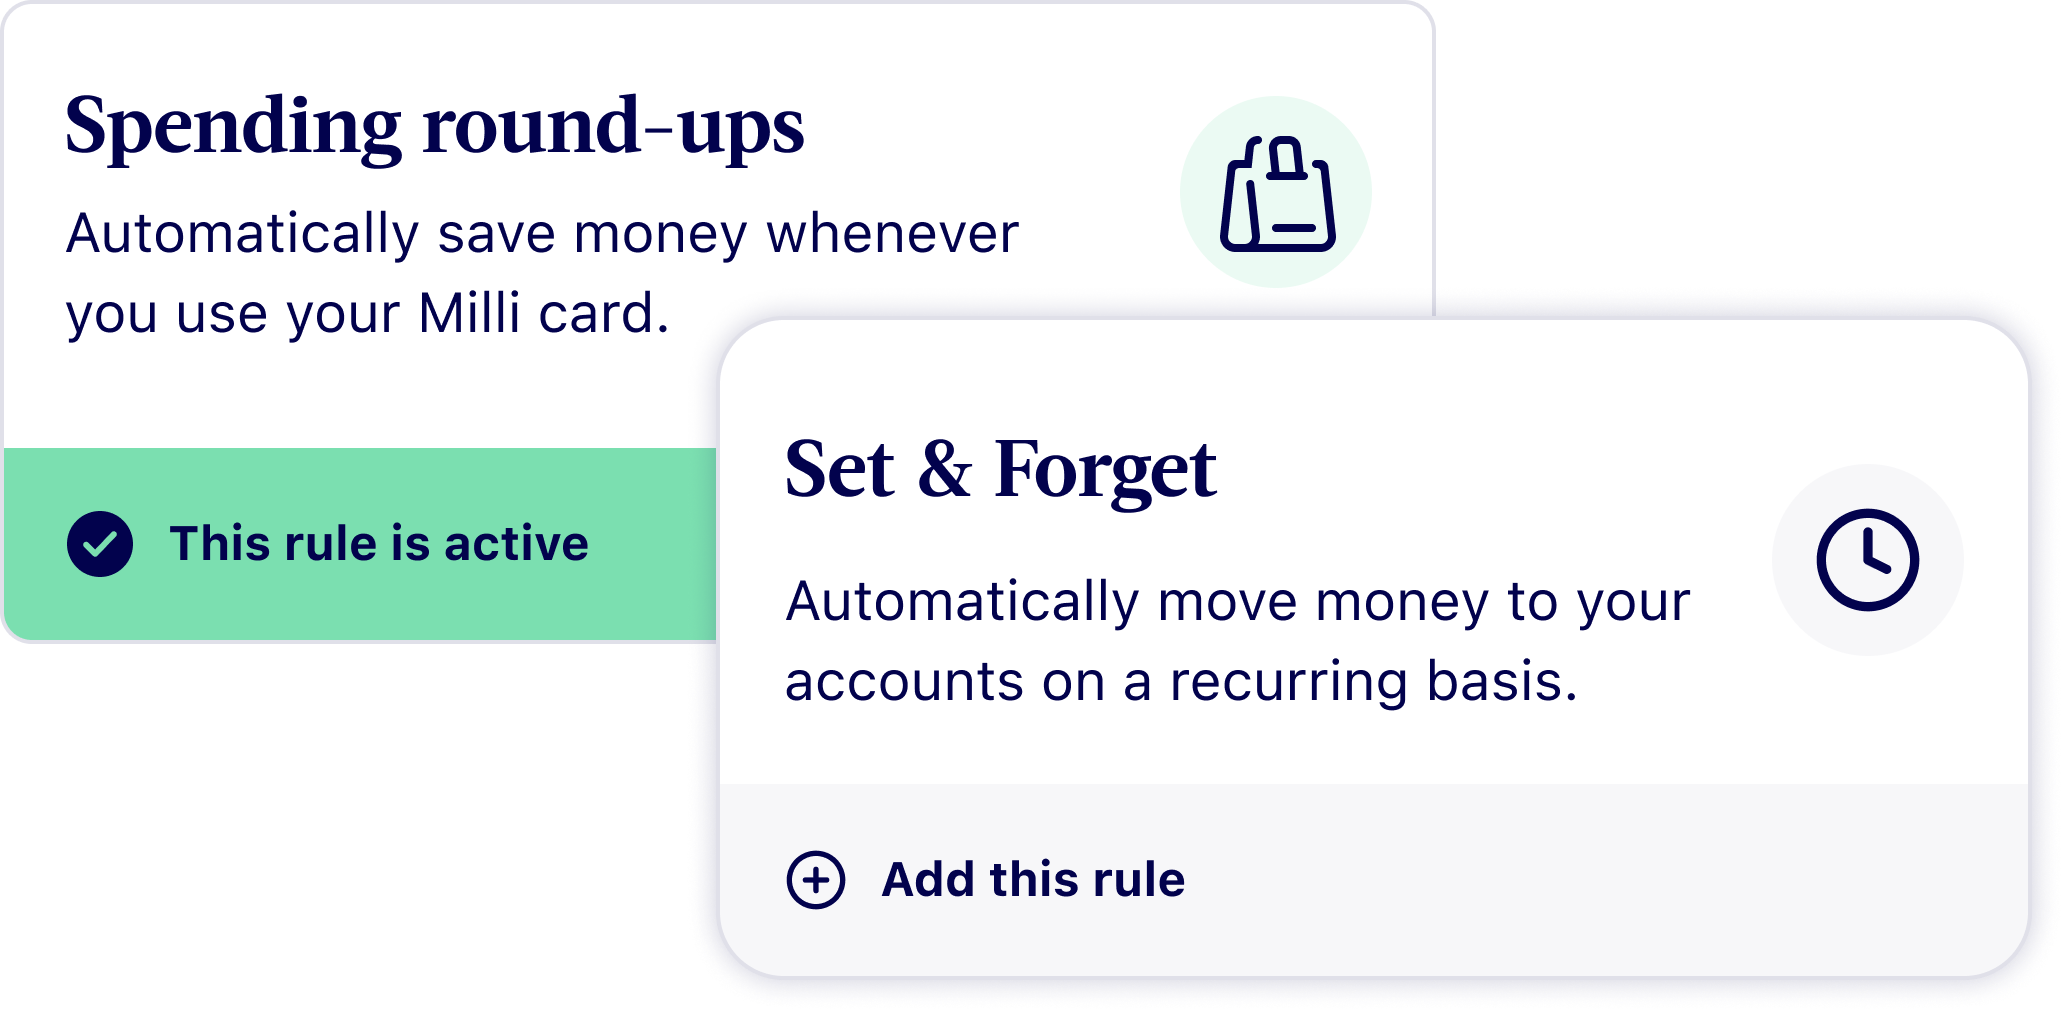 This is a graphic showing Milli's auto save rules of Spending round-ups and Set and Forget.